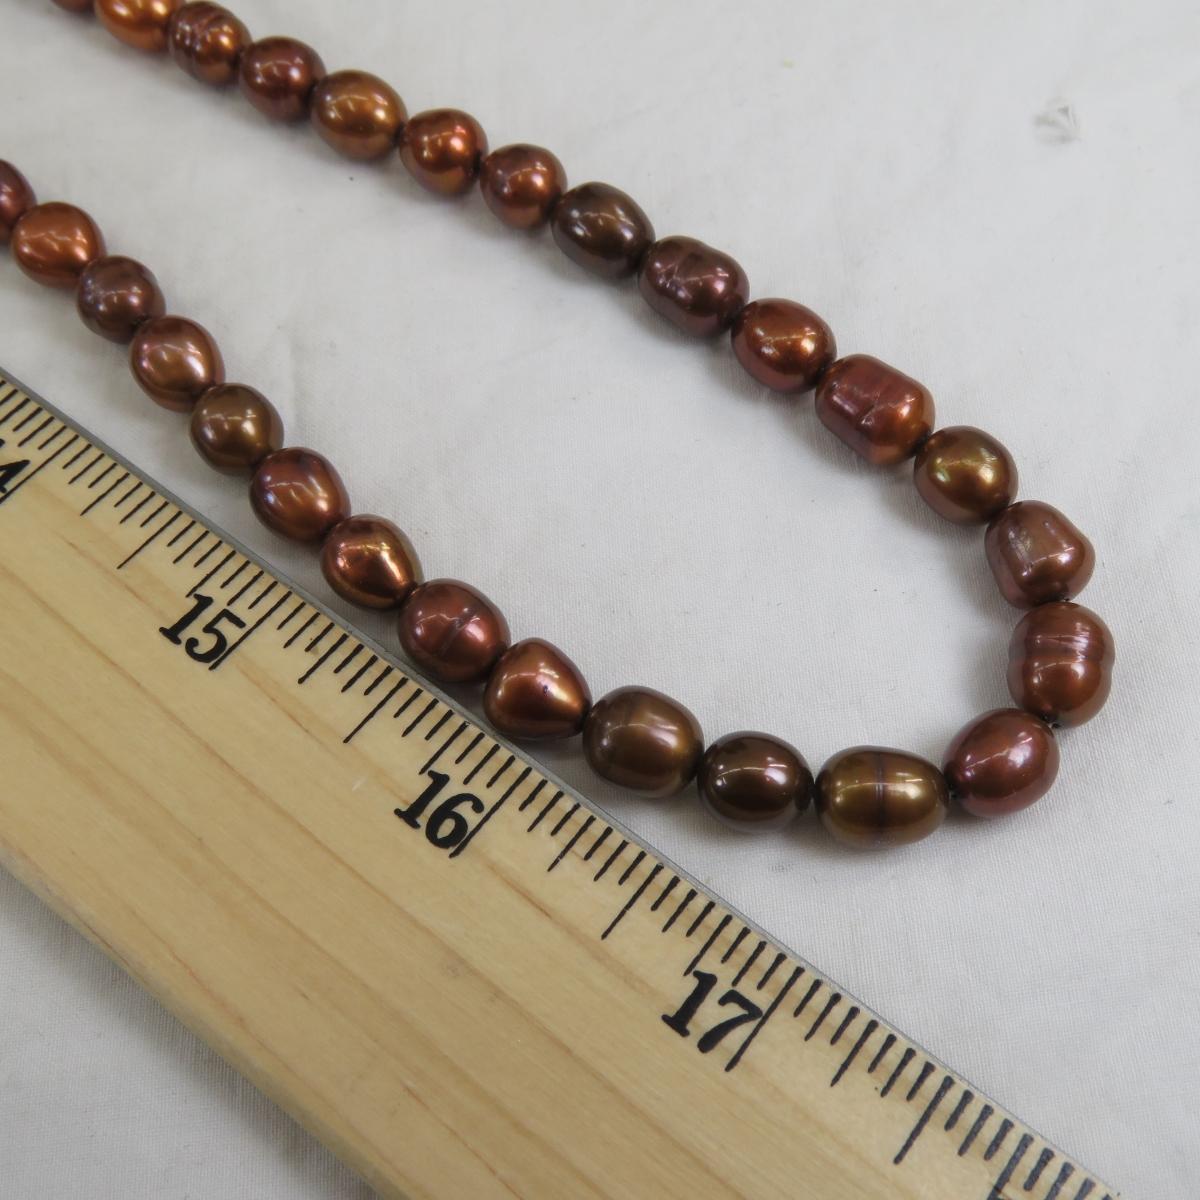 Copper & Black Pearl Necklaces with Other Jewelry